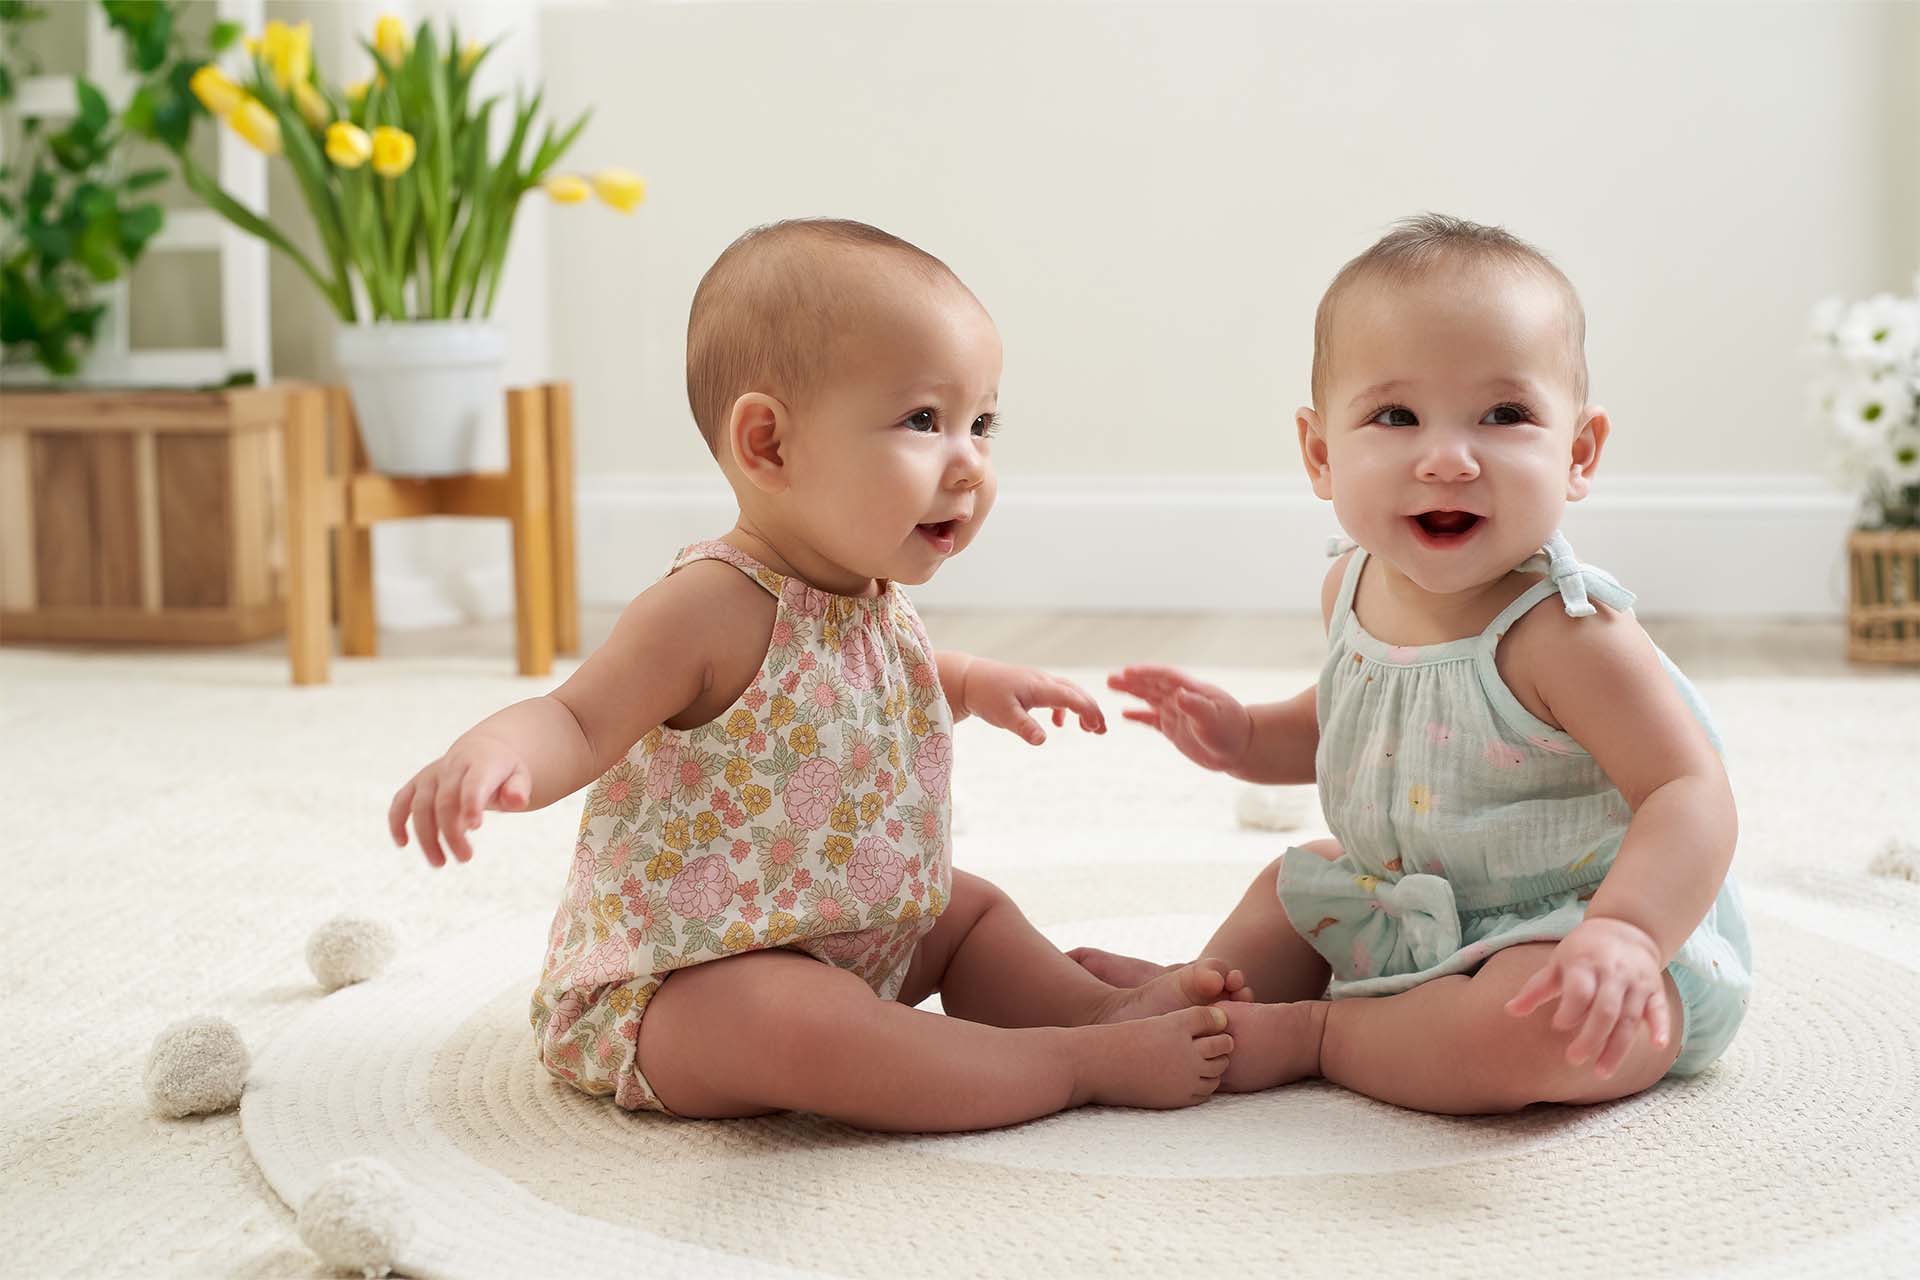 Two baby girls wearing spring outfits are sitting on a rug, smiling and playing with each other.